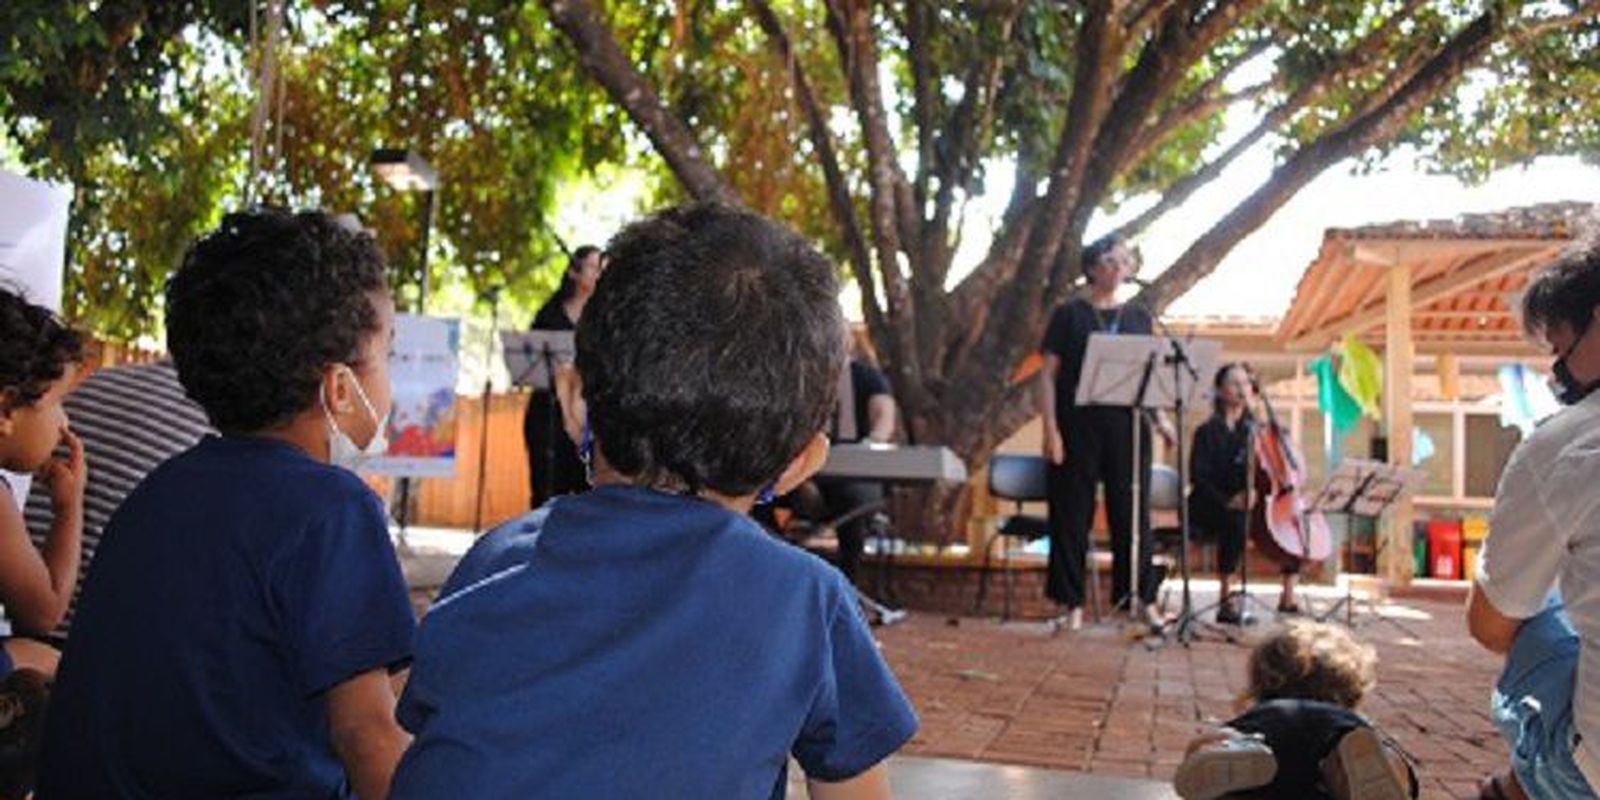 Children from CMEIs in Goiânia receive classical music concerts